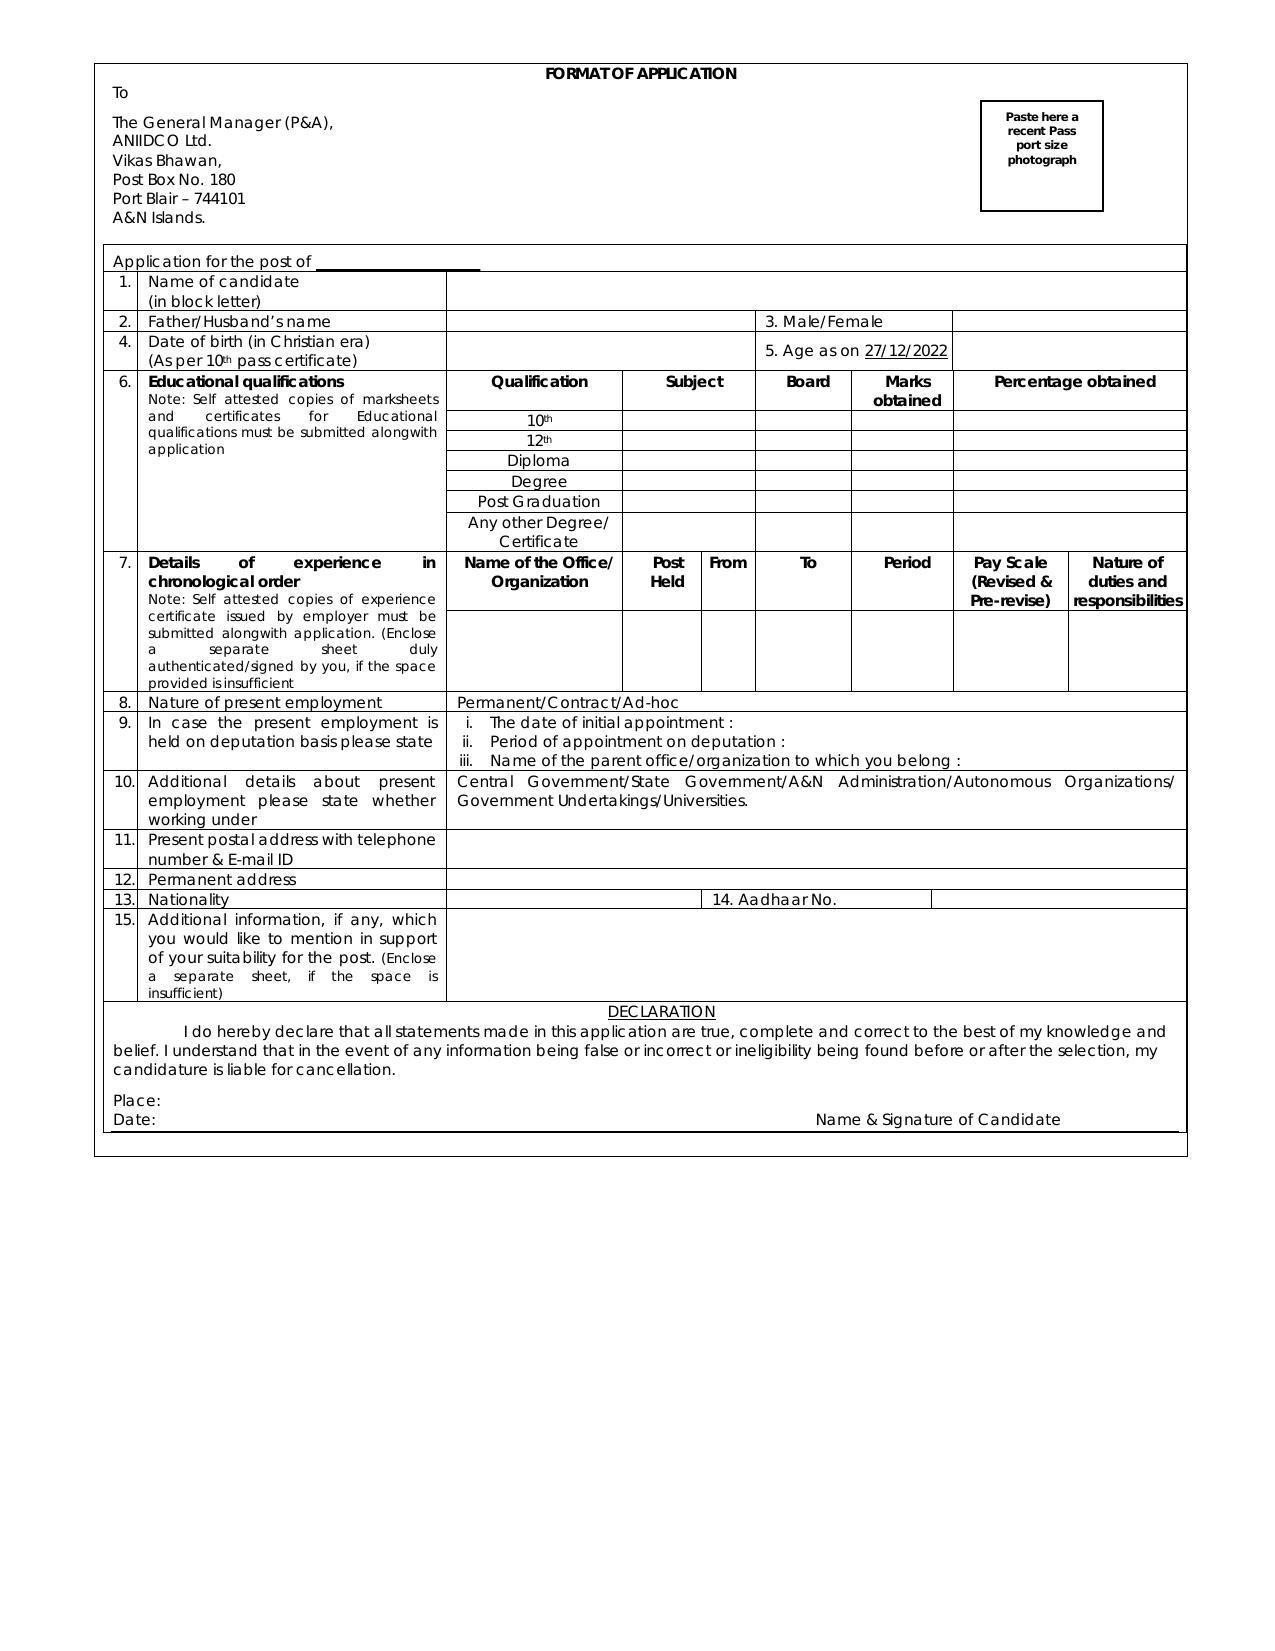 ANIIDCO Invites Application for 18 Environmental Planner, More Vacancies Recruitment 2022 - Page 5